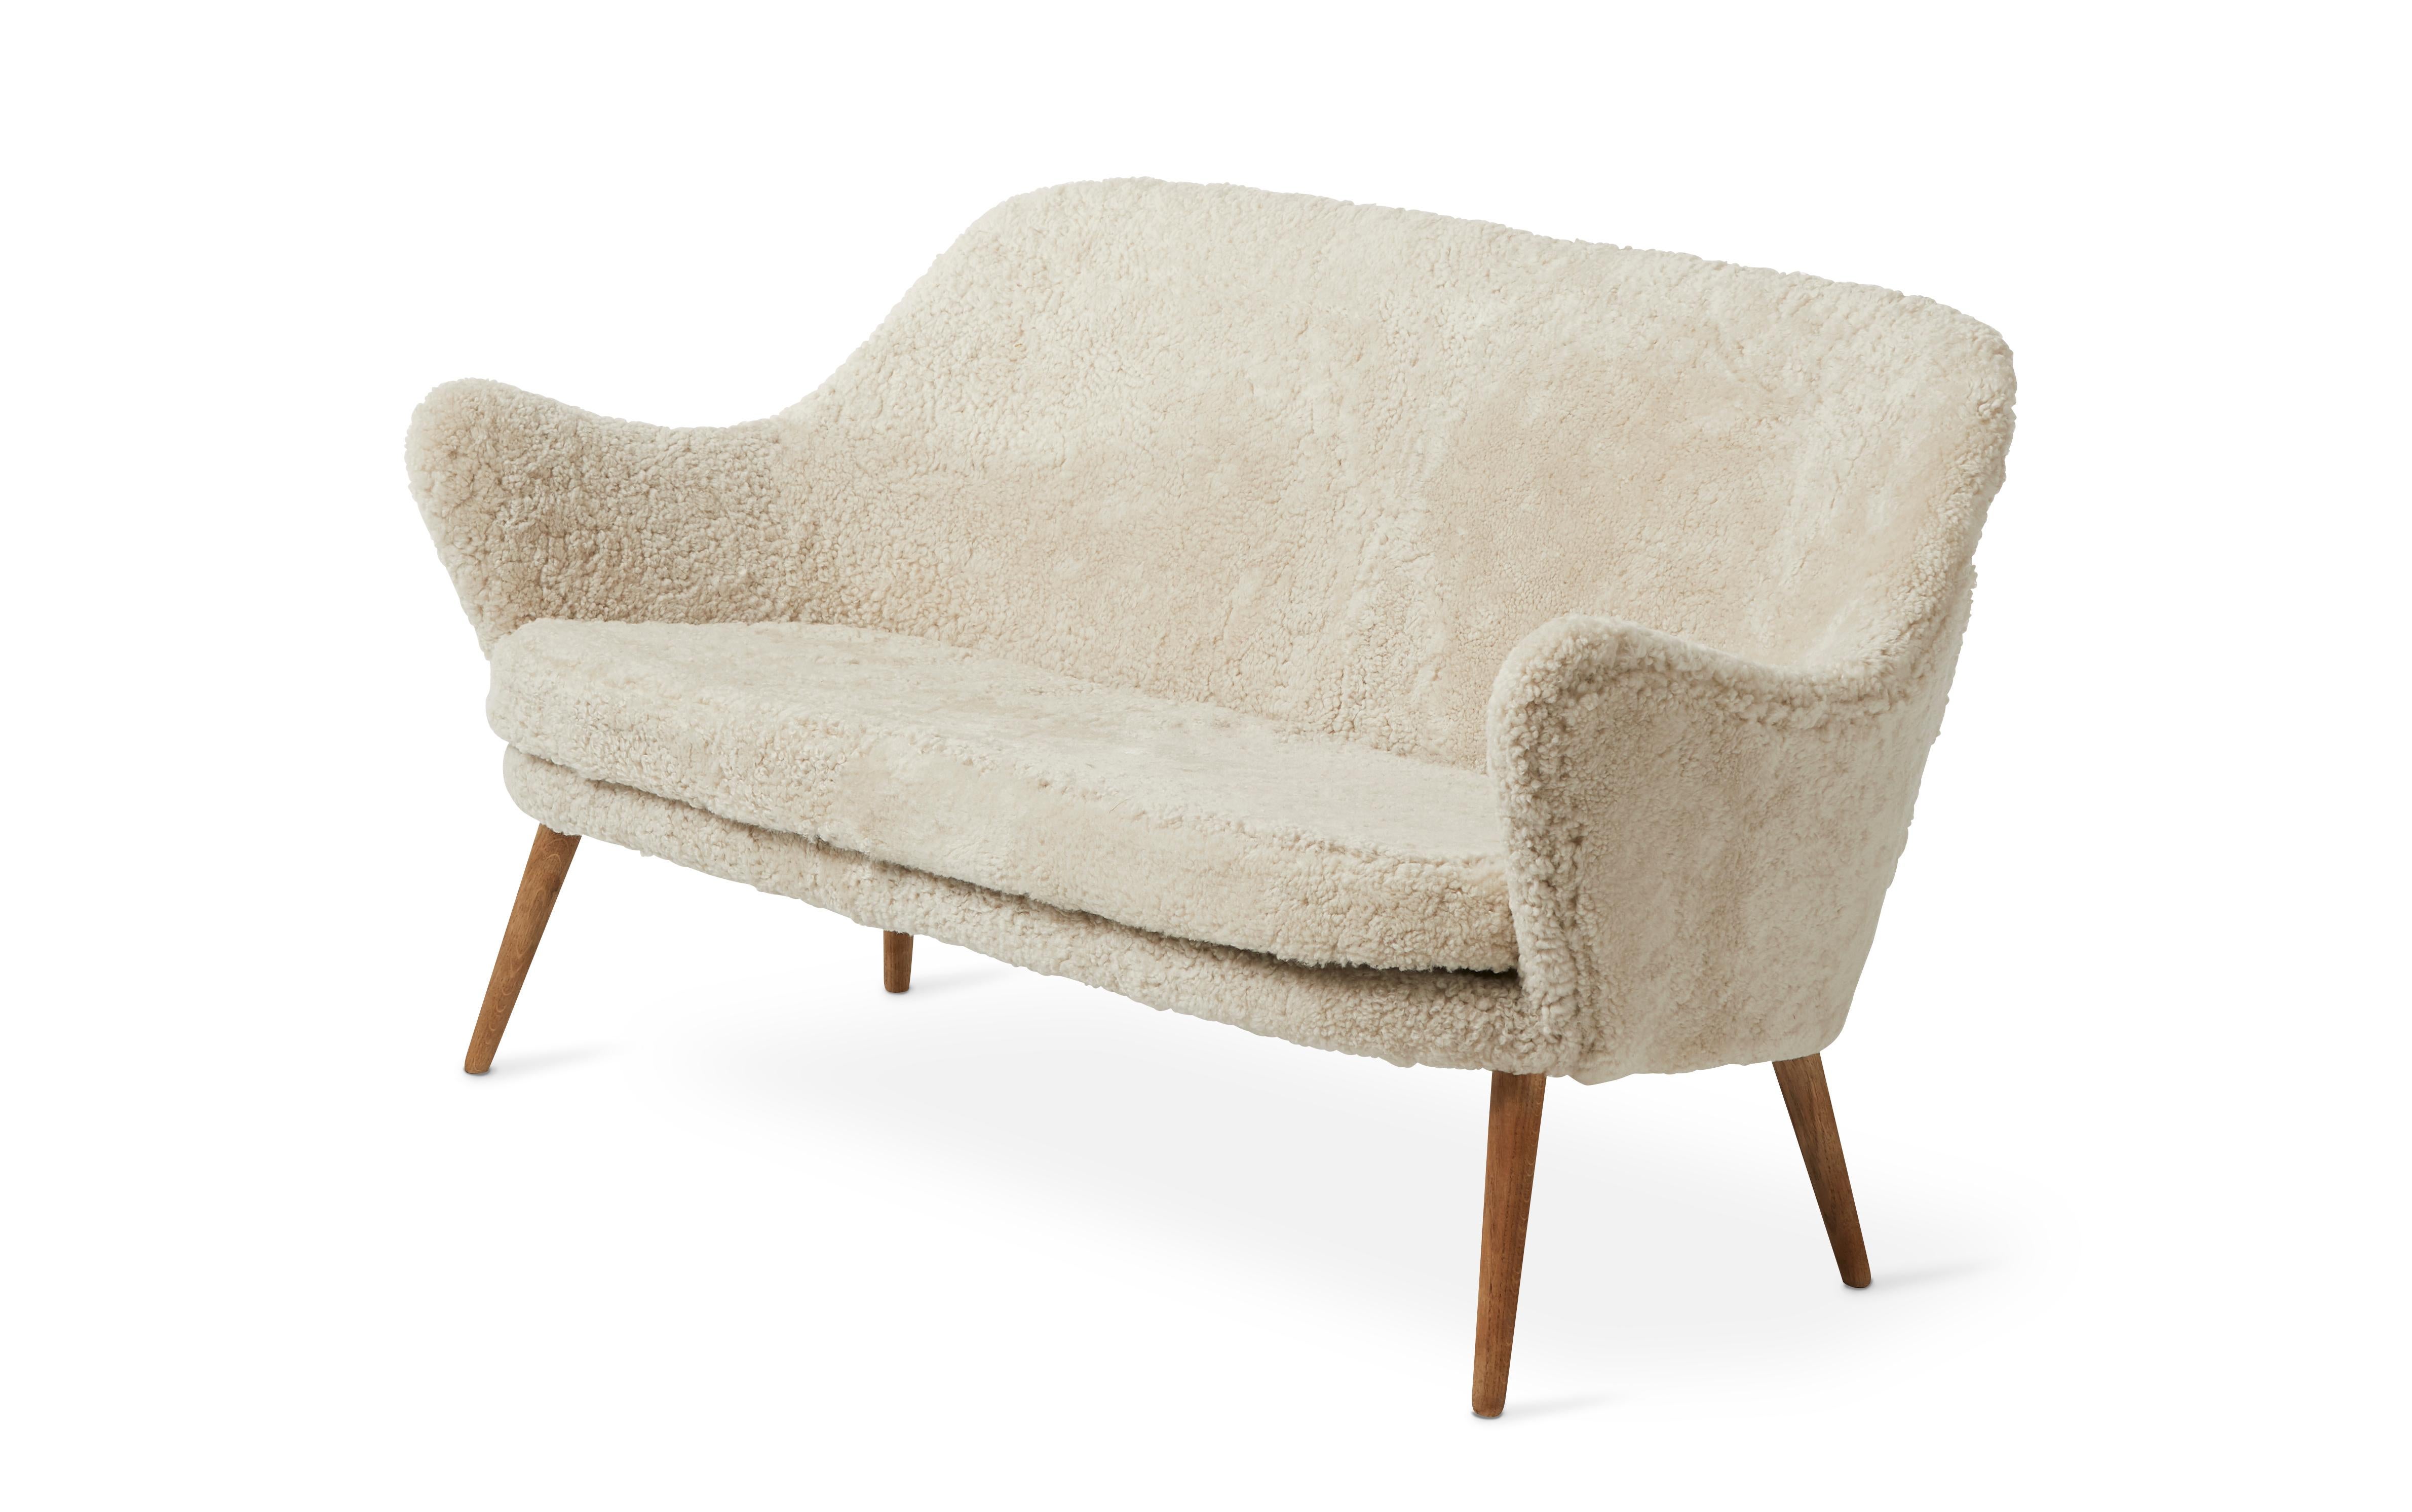 En vente : White (Sheepskin Moonlight) Canapé 2 places Dwellings, by Hans Olsen from Warm Nordic 2